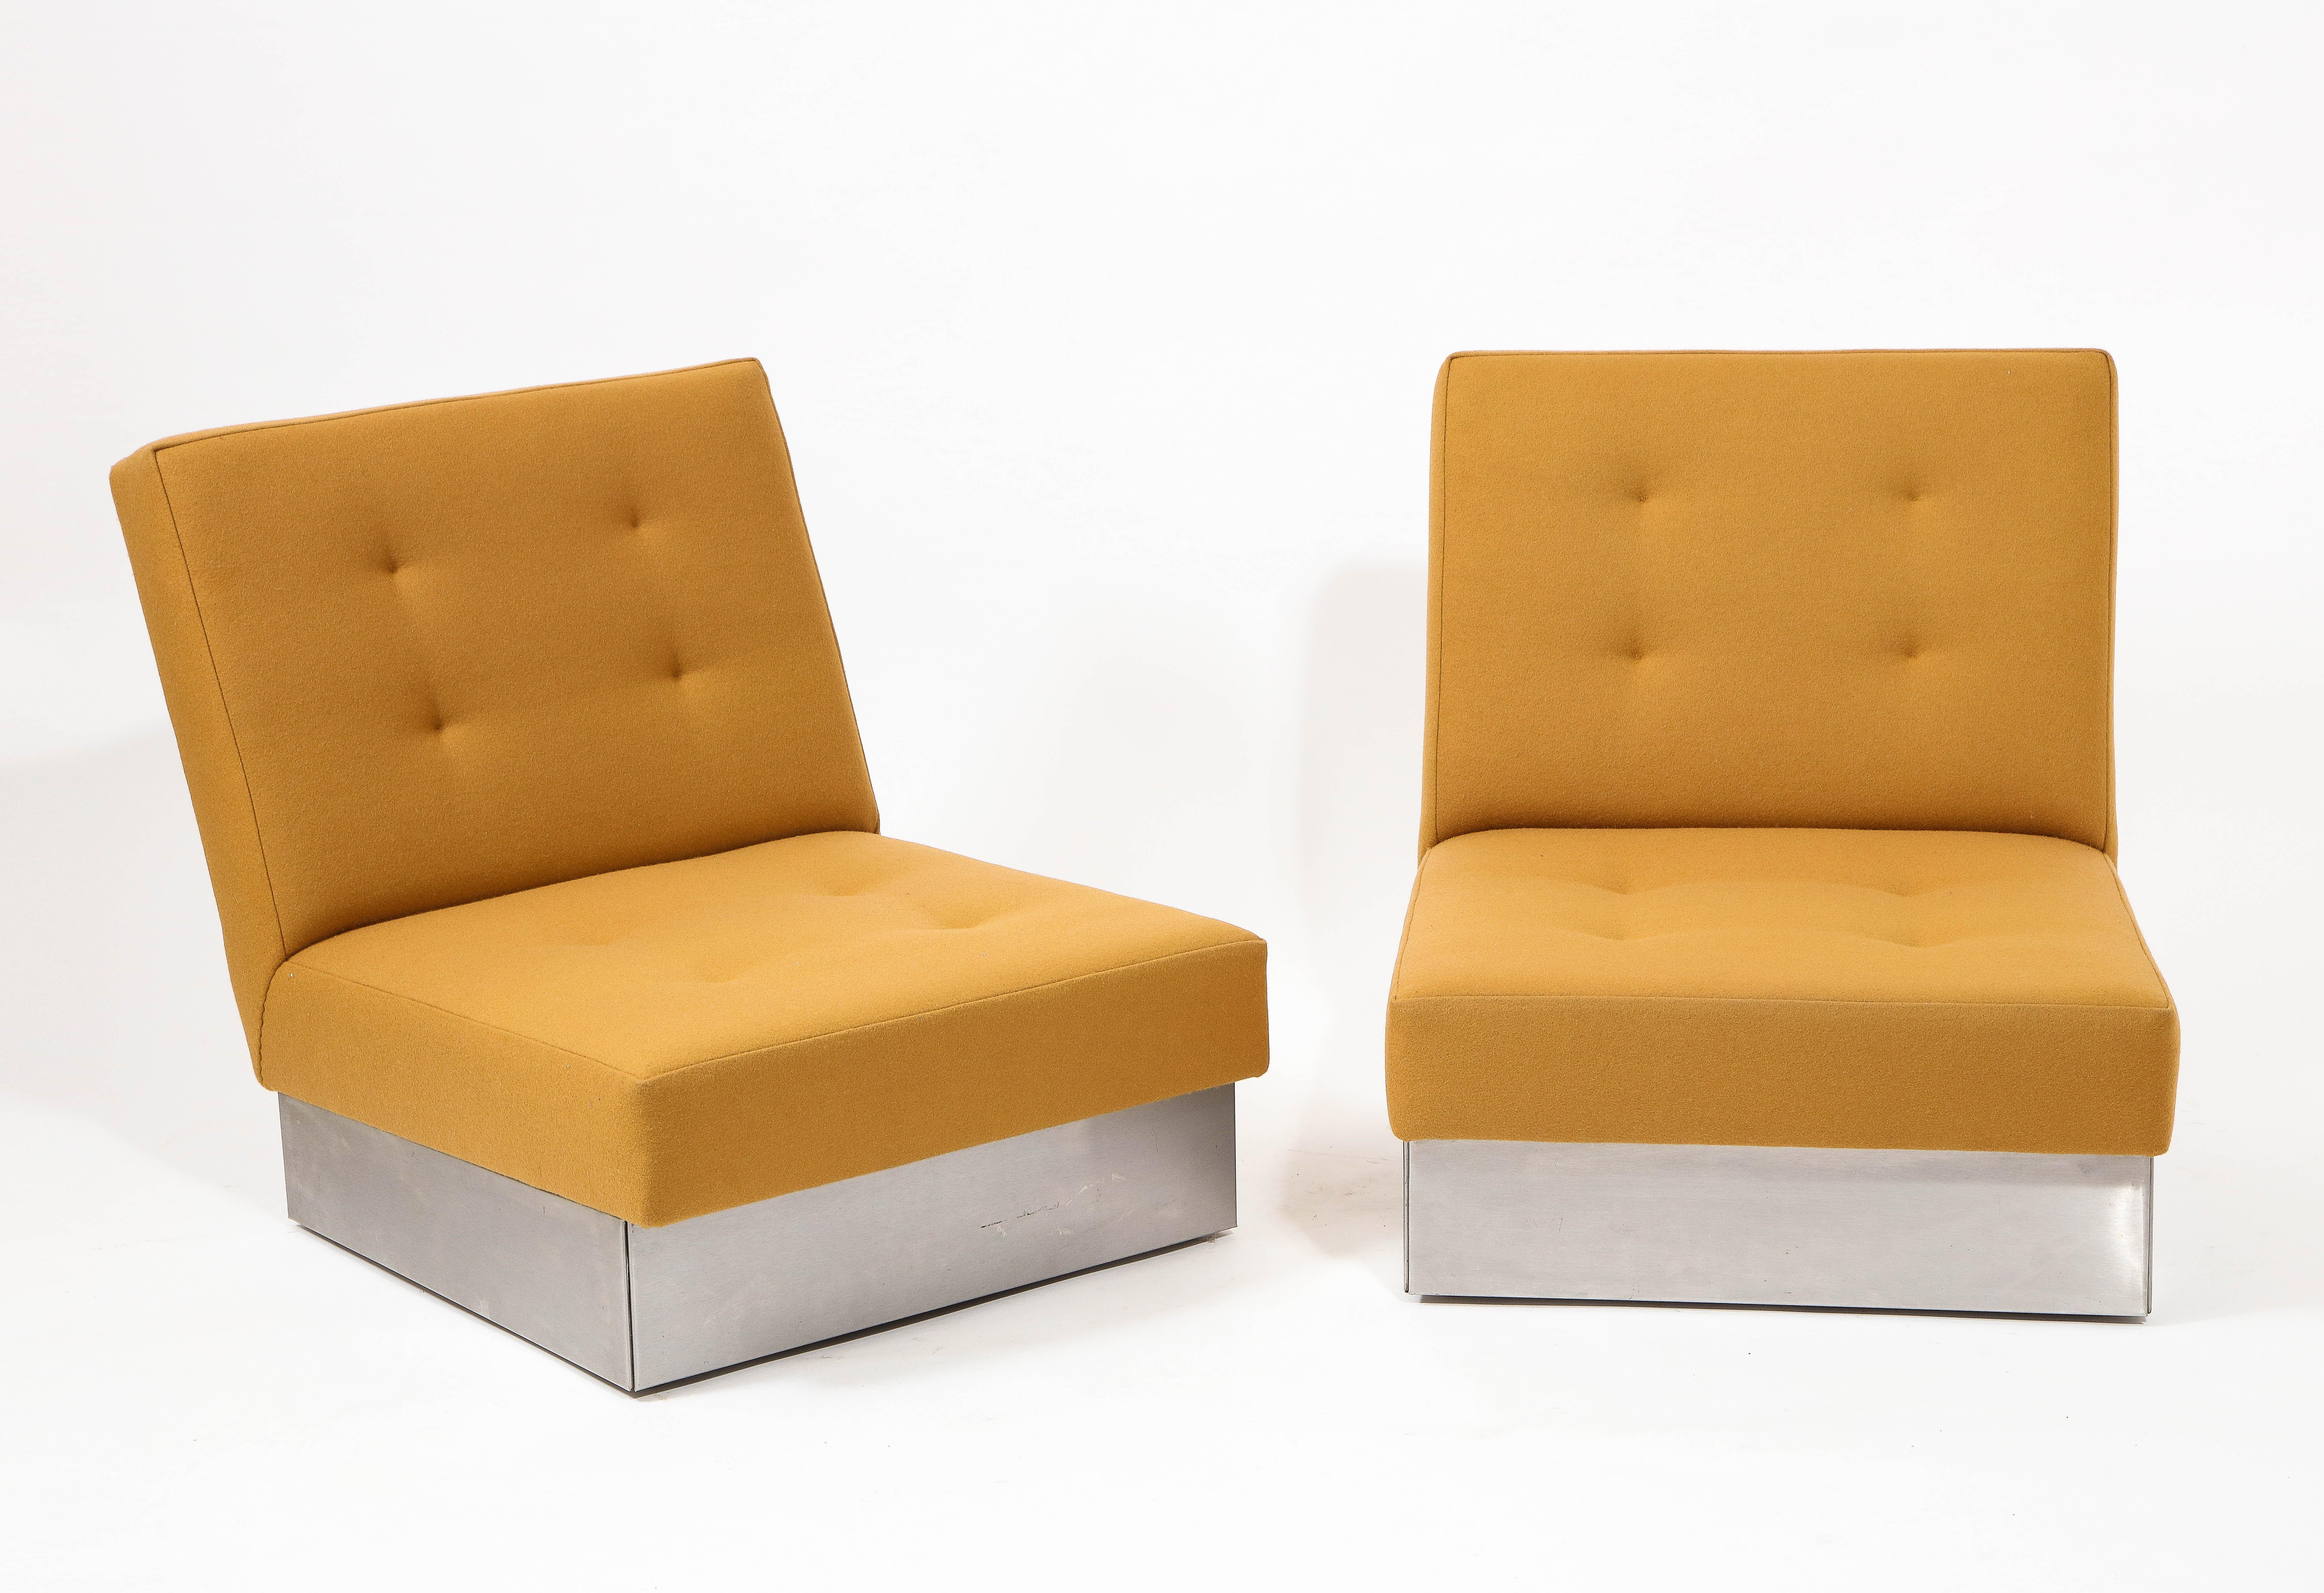 Classic 70's slipper chairs by Jacques Charpentier for Roche & Bobois, upholstered in Maharam wool over a brushed stainless steel base. Note the low seat height. Another set is available for COM.